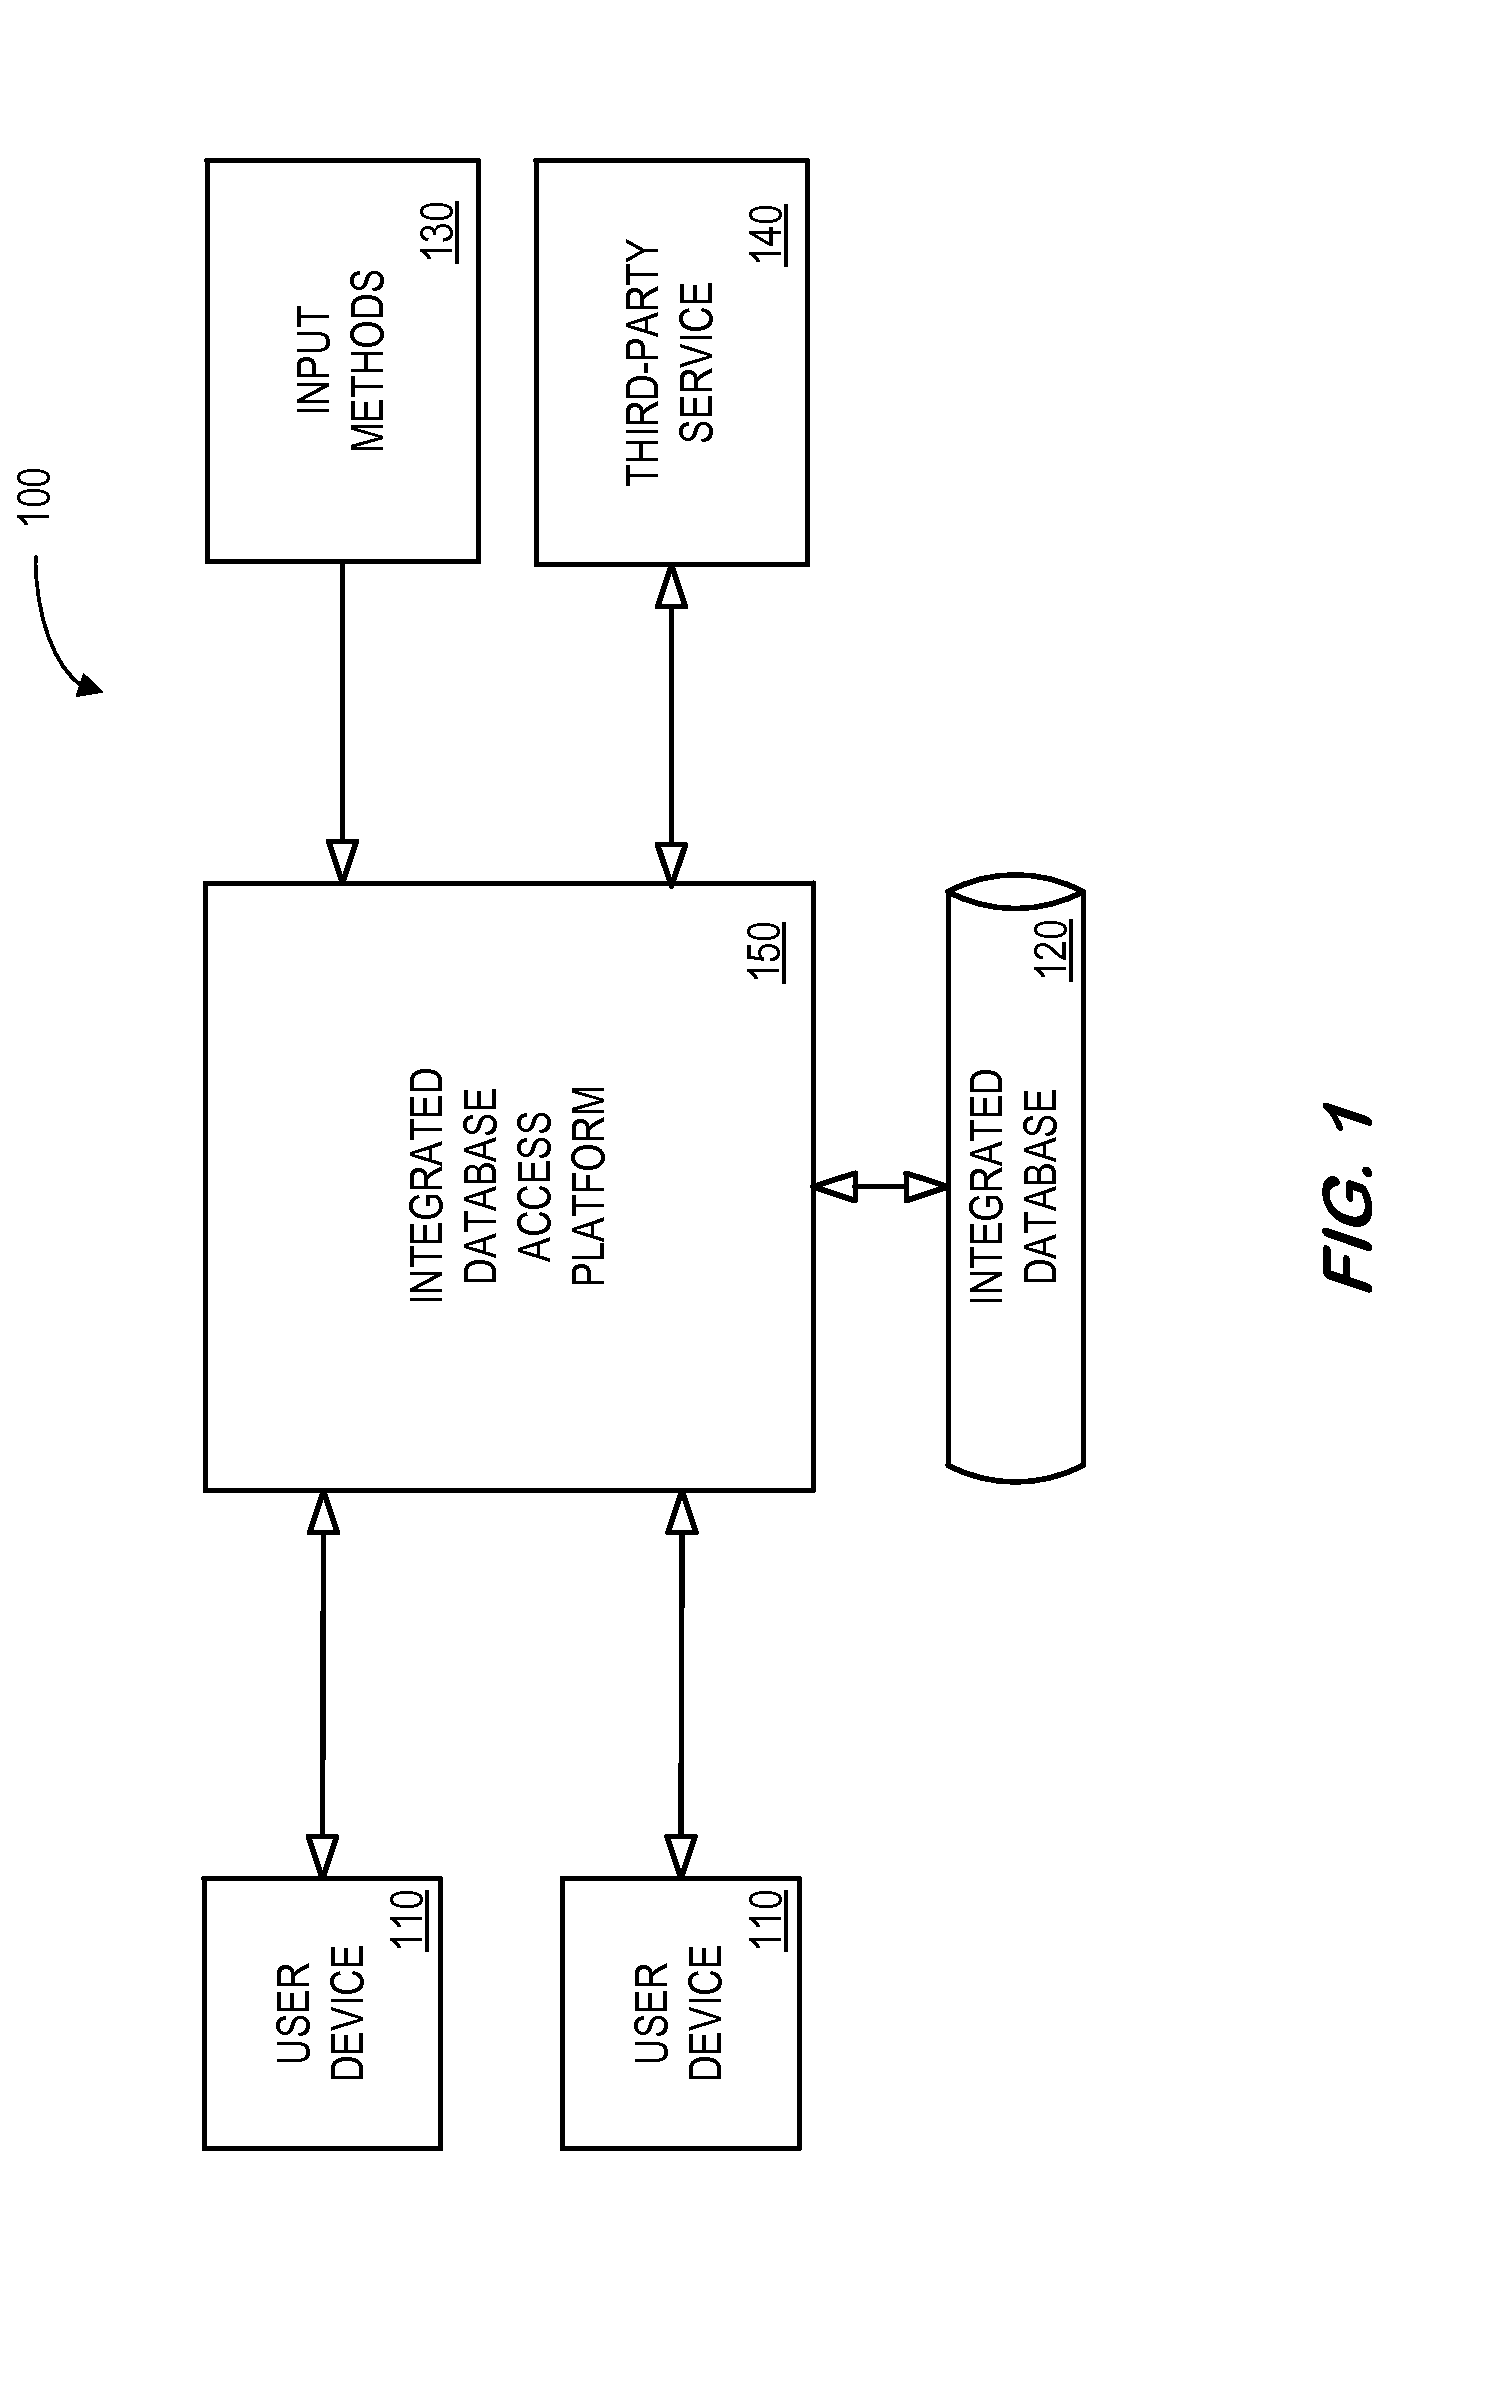 System and method for deterministic and probabilistic match with delayed confirmation